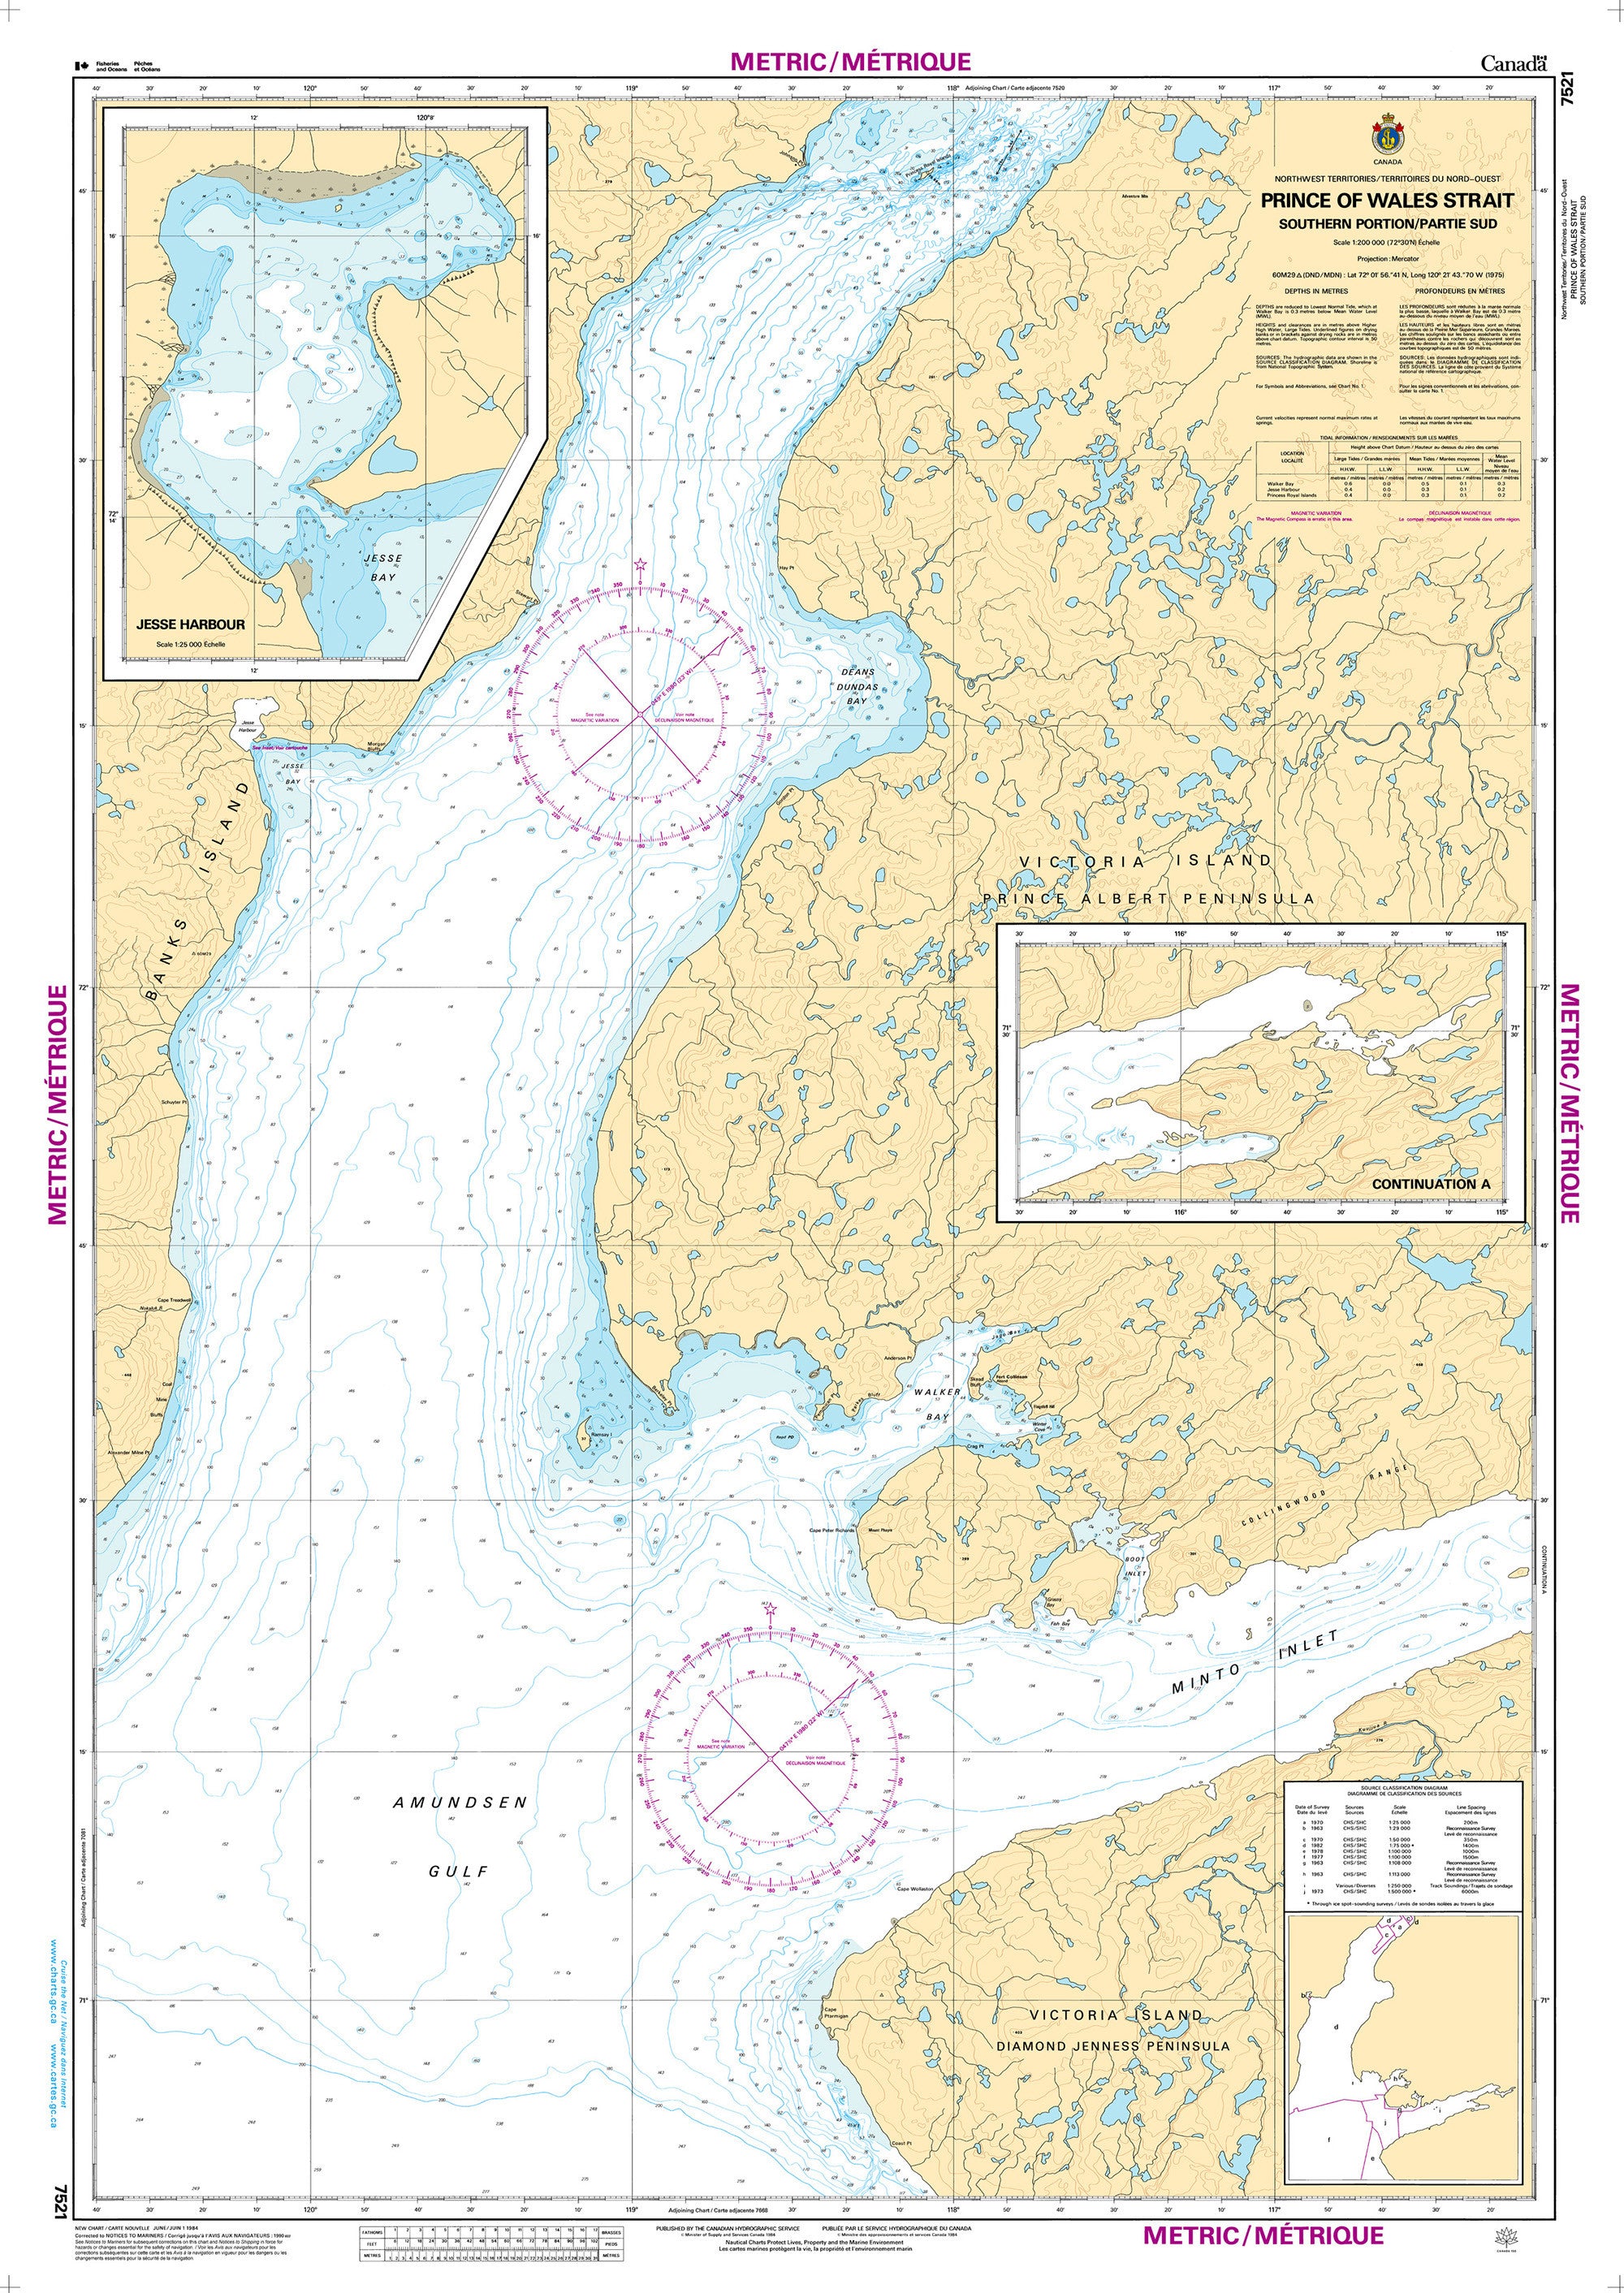 Canadian Hydrographic Service Nautical Chart CHS7521: Prince of Wales Strait, Southern Portion/ Partie Sud